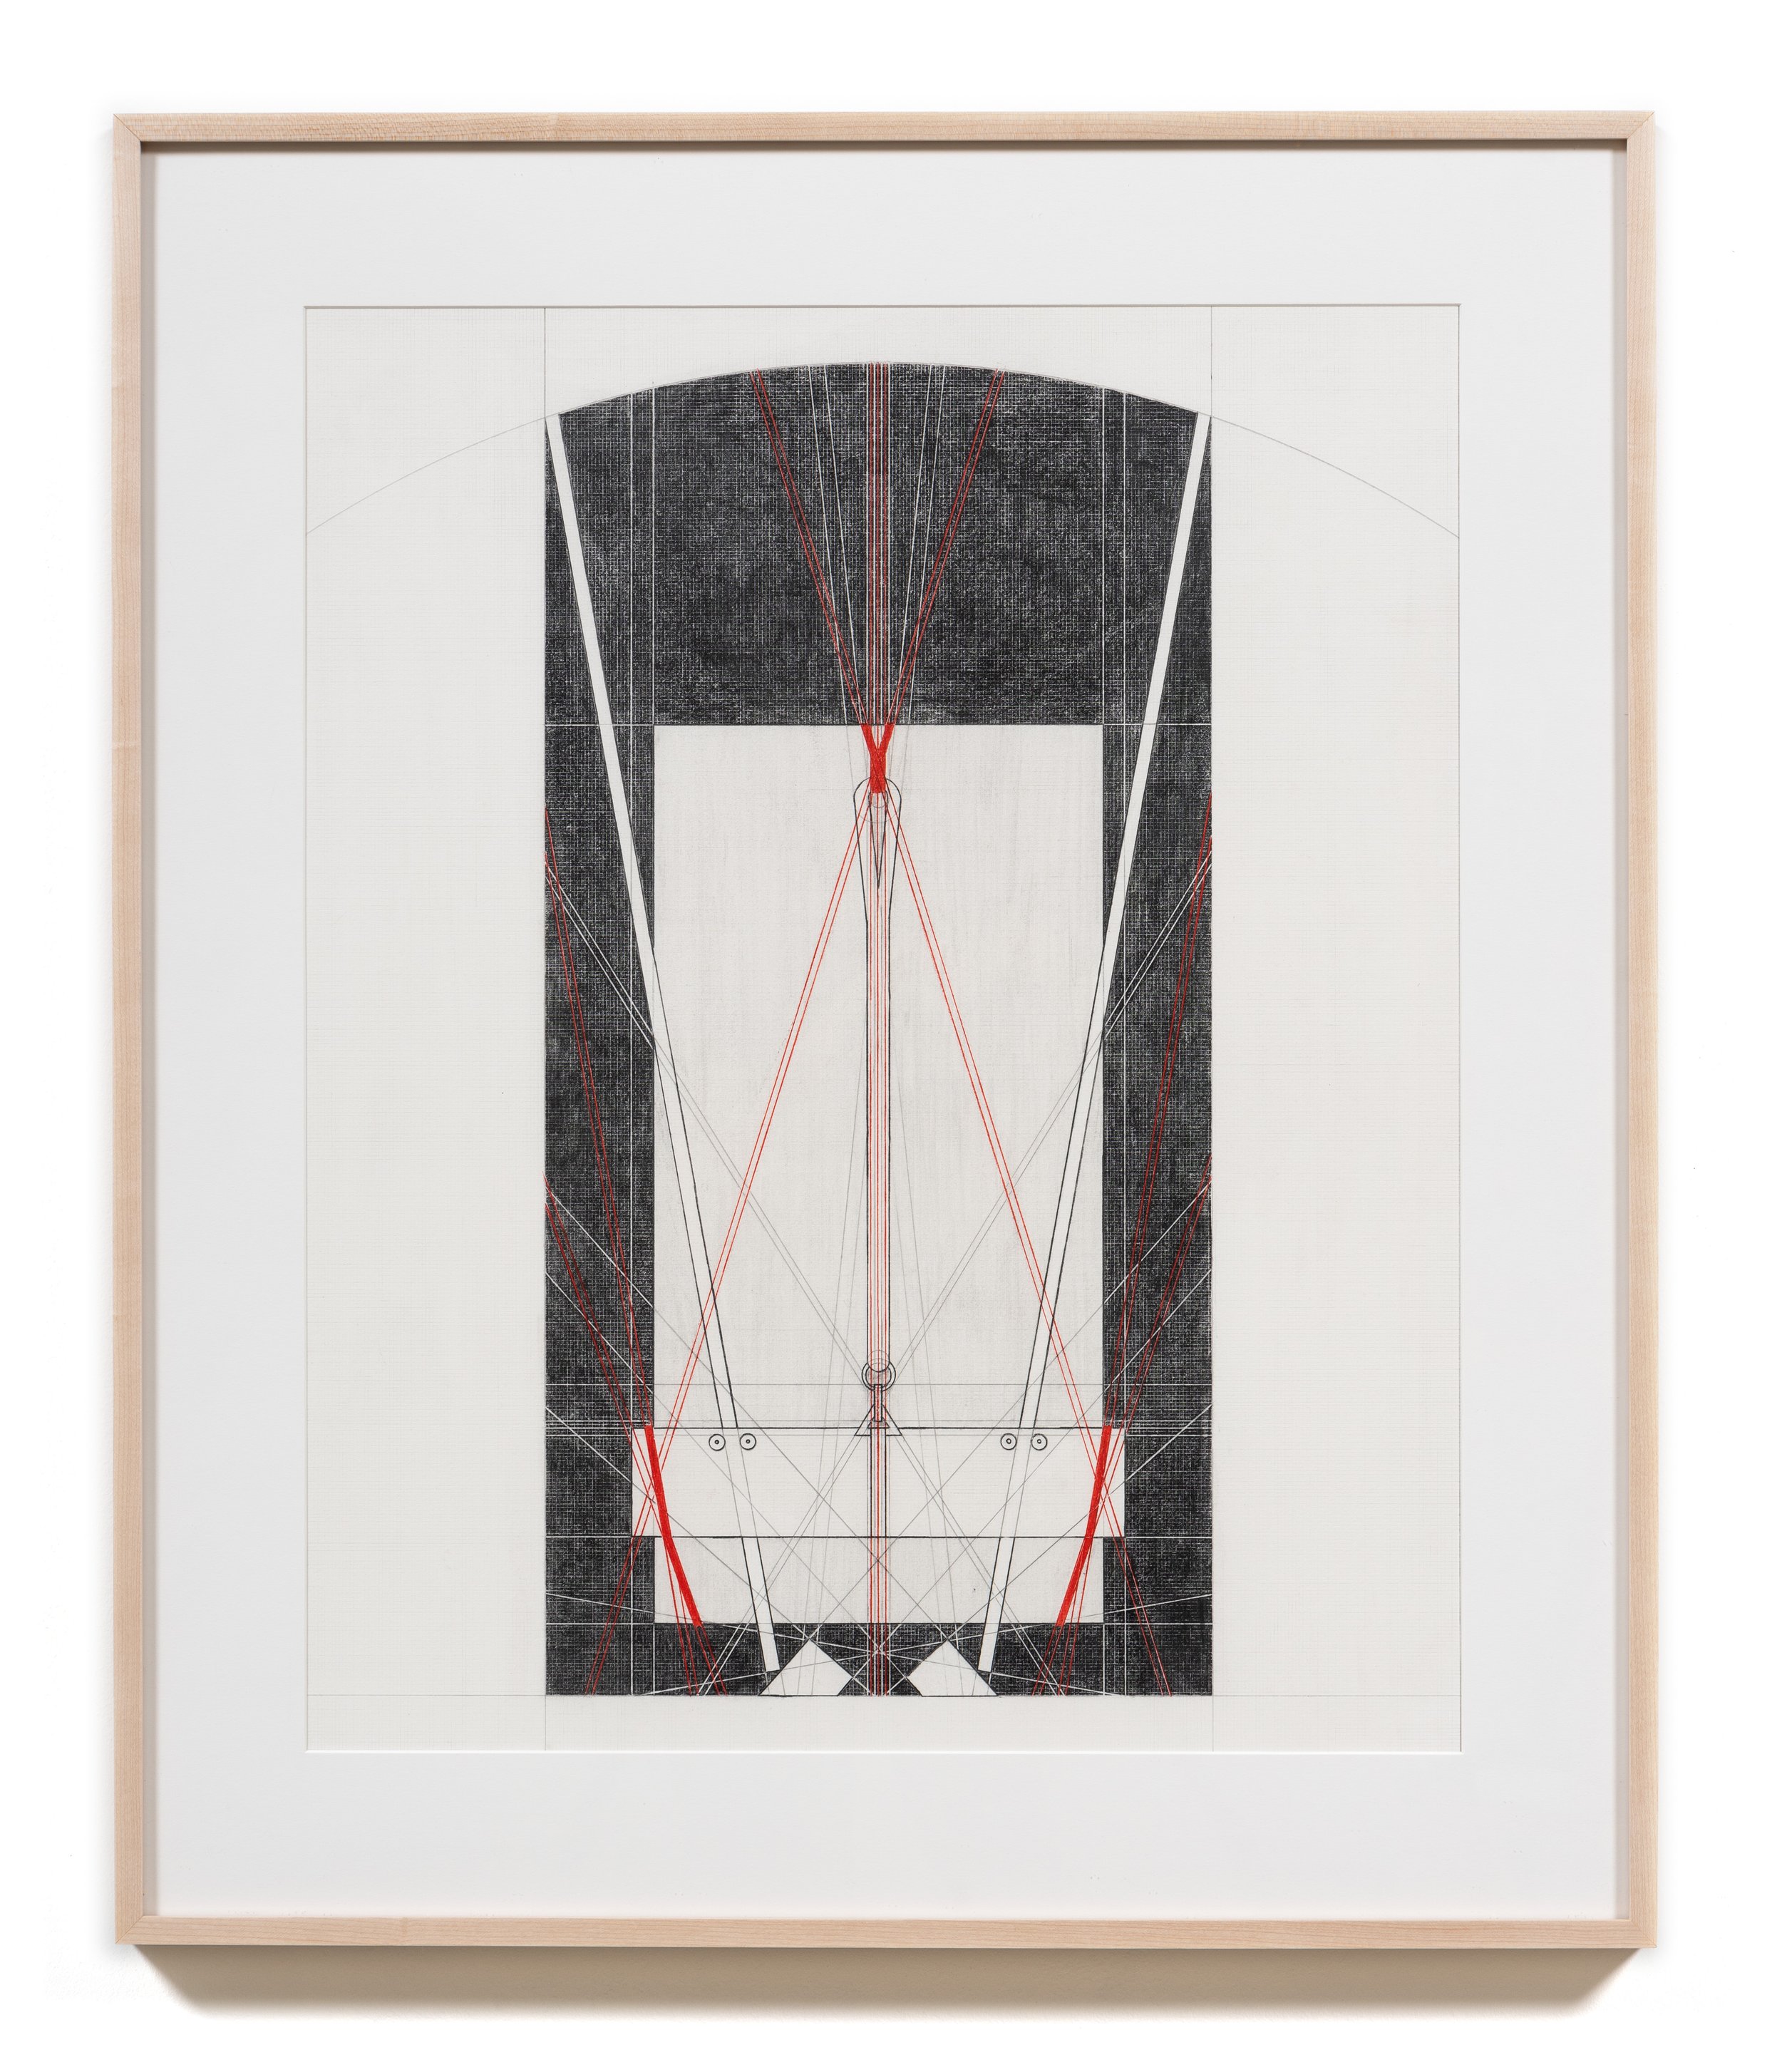   Window Fashions , 2021 Graphite and colored pencil on paper 36 x 31 x 1 1/2 inches (framed) 